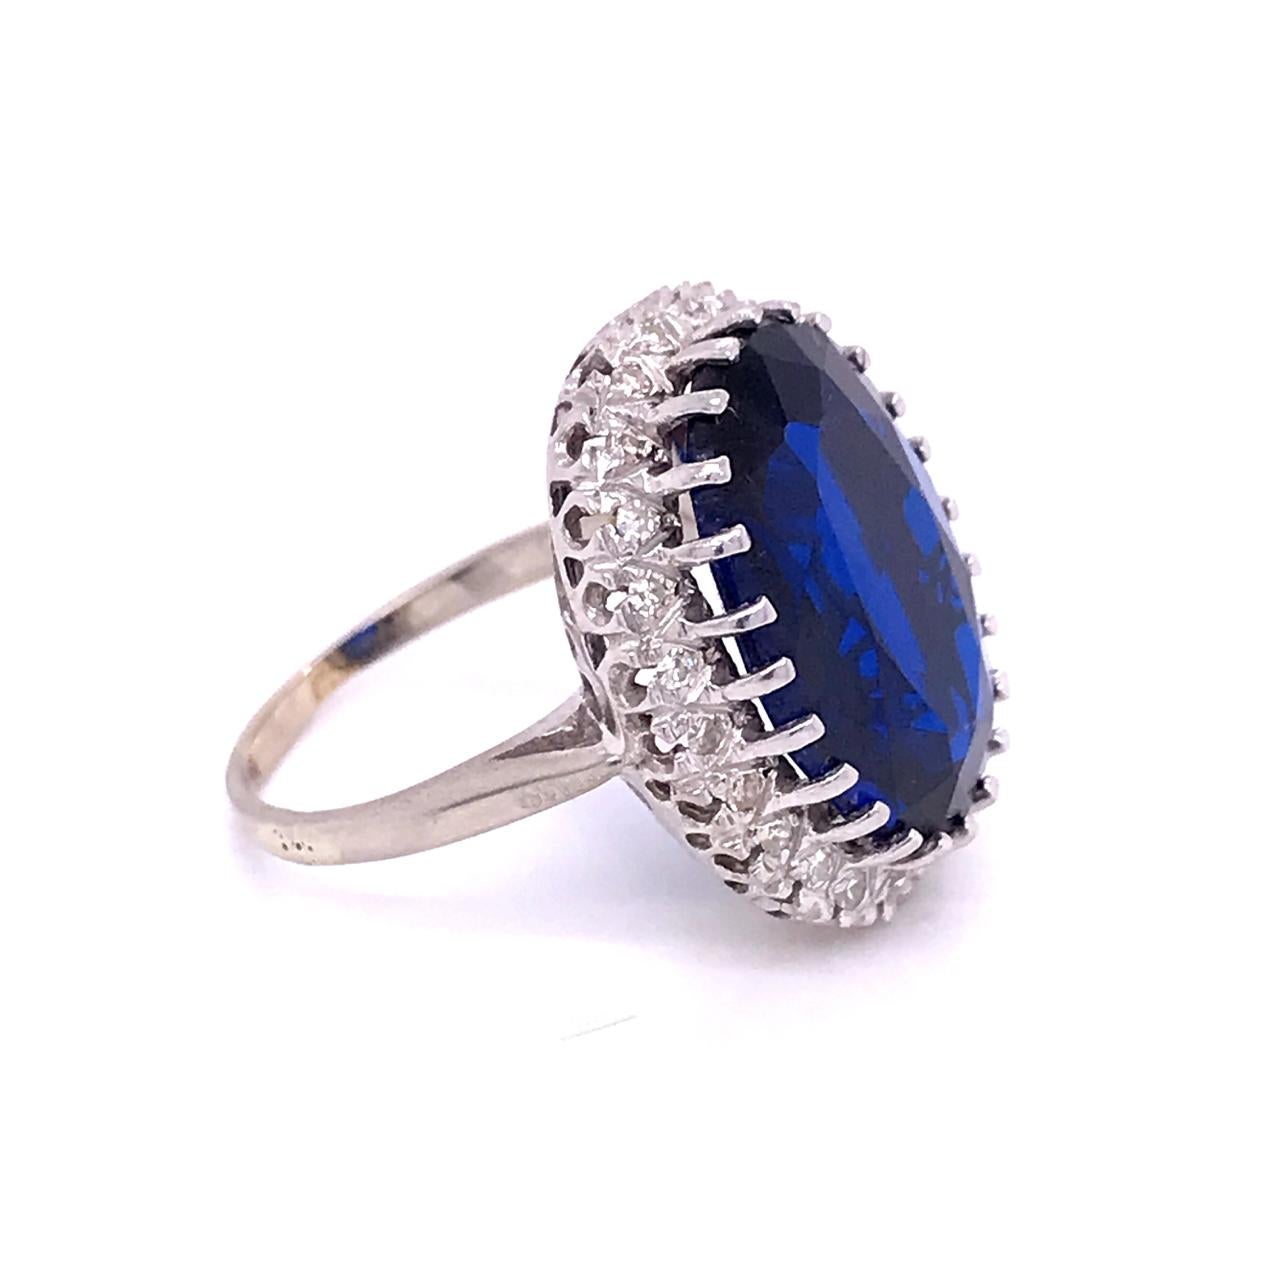 14 Karat White Gold, Diamond, and Large Blue Topaz Cocktail Ring For Sale 5